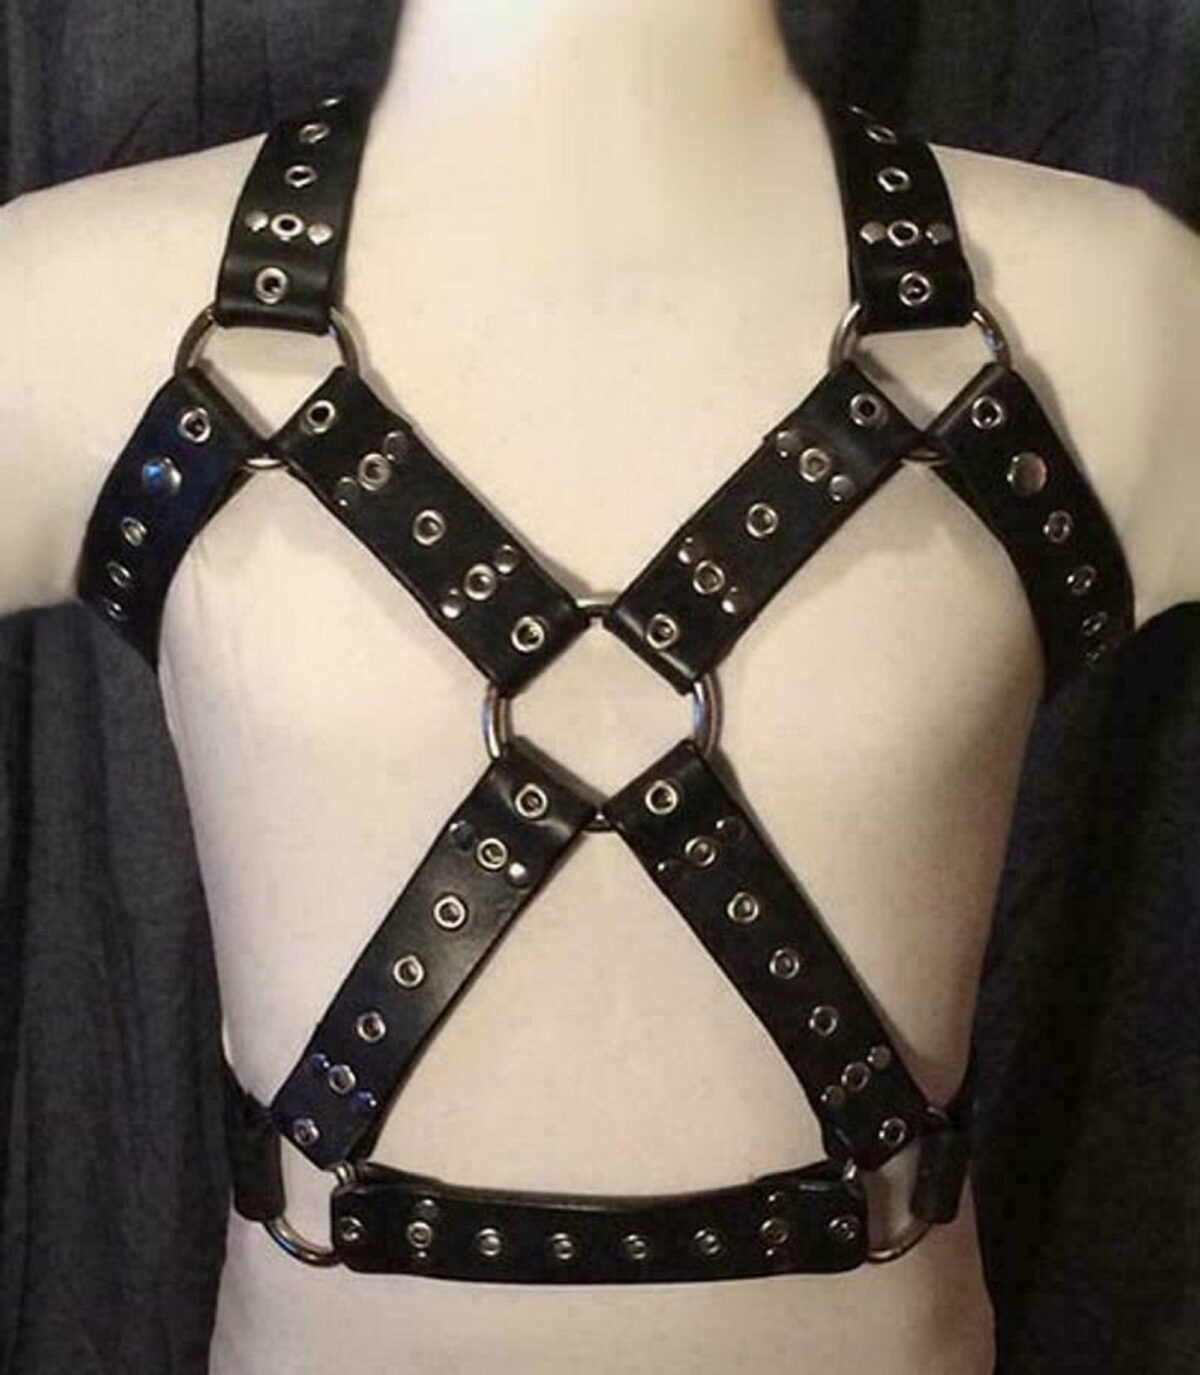 Handcrafted Leather Harness for Timeless Elegance